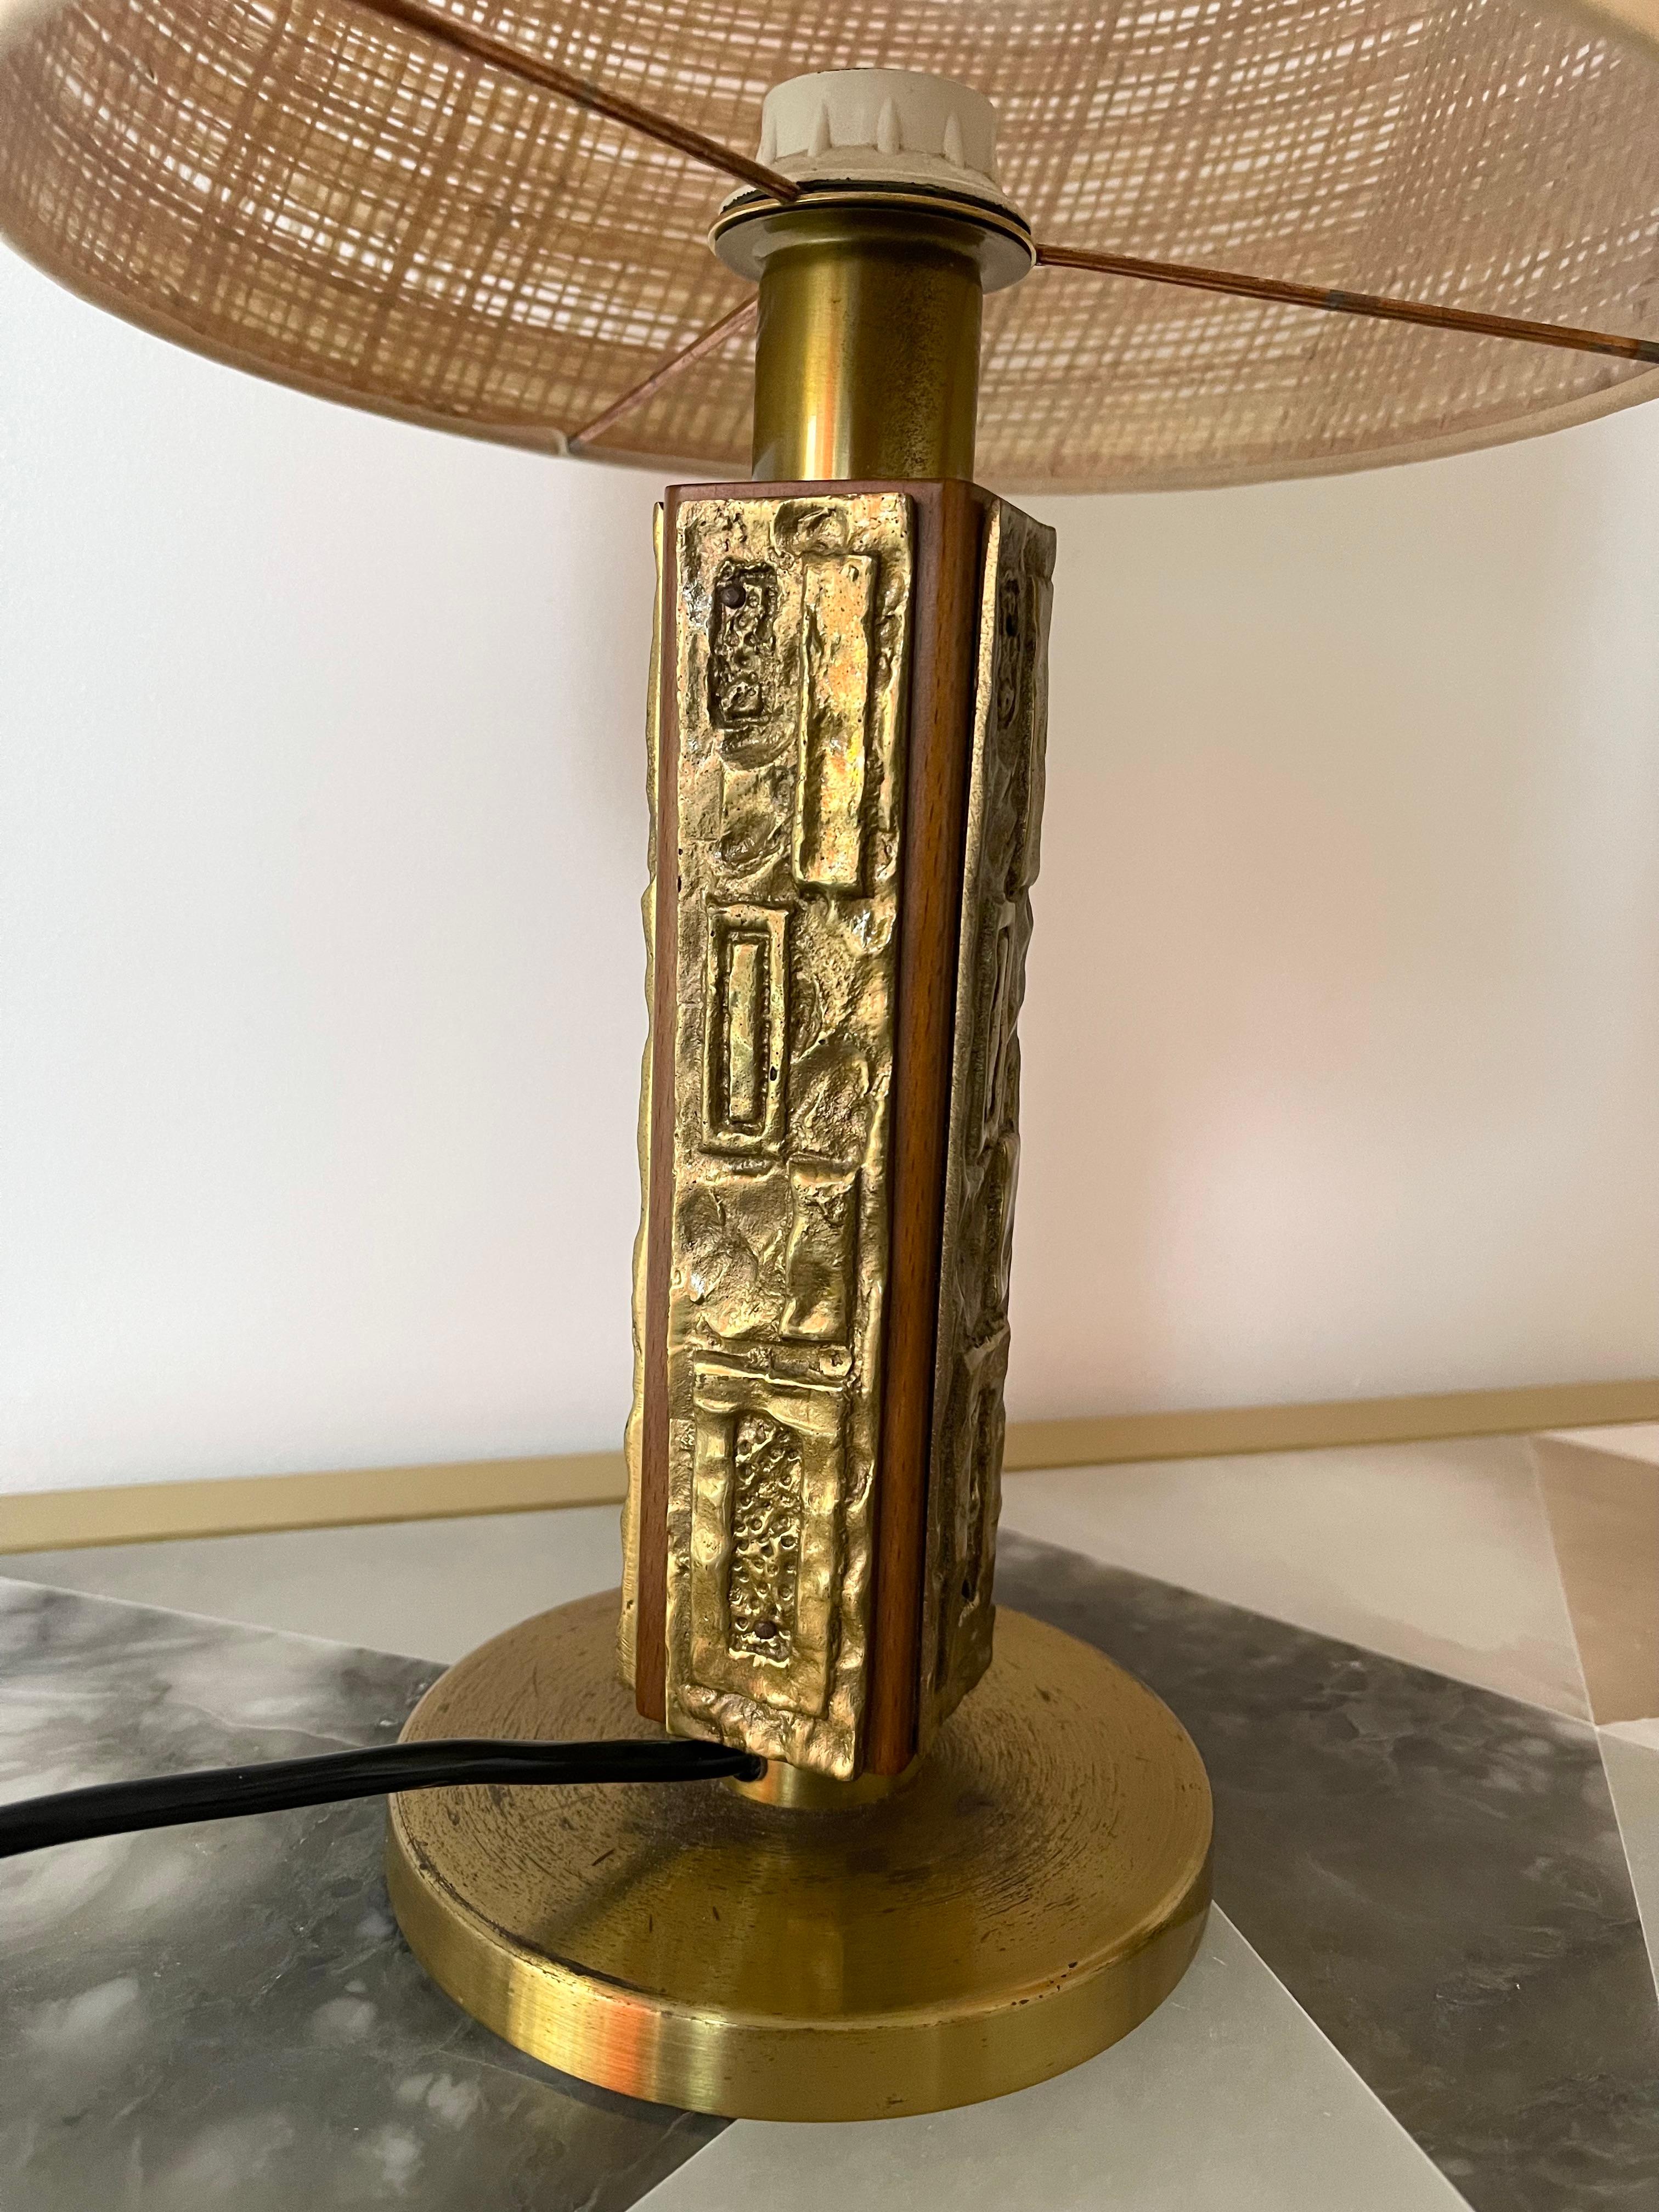 Pair of Brass and Wood Sculpture Lamps by Angelo Brotto for Esperia Italy, 1970s For Sale 4